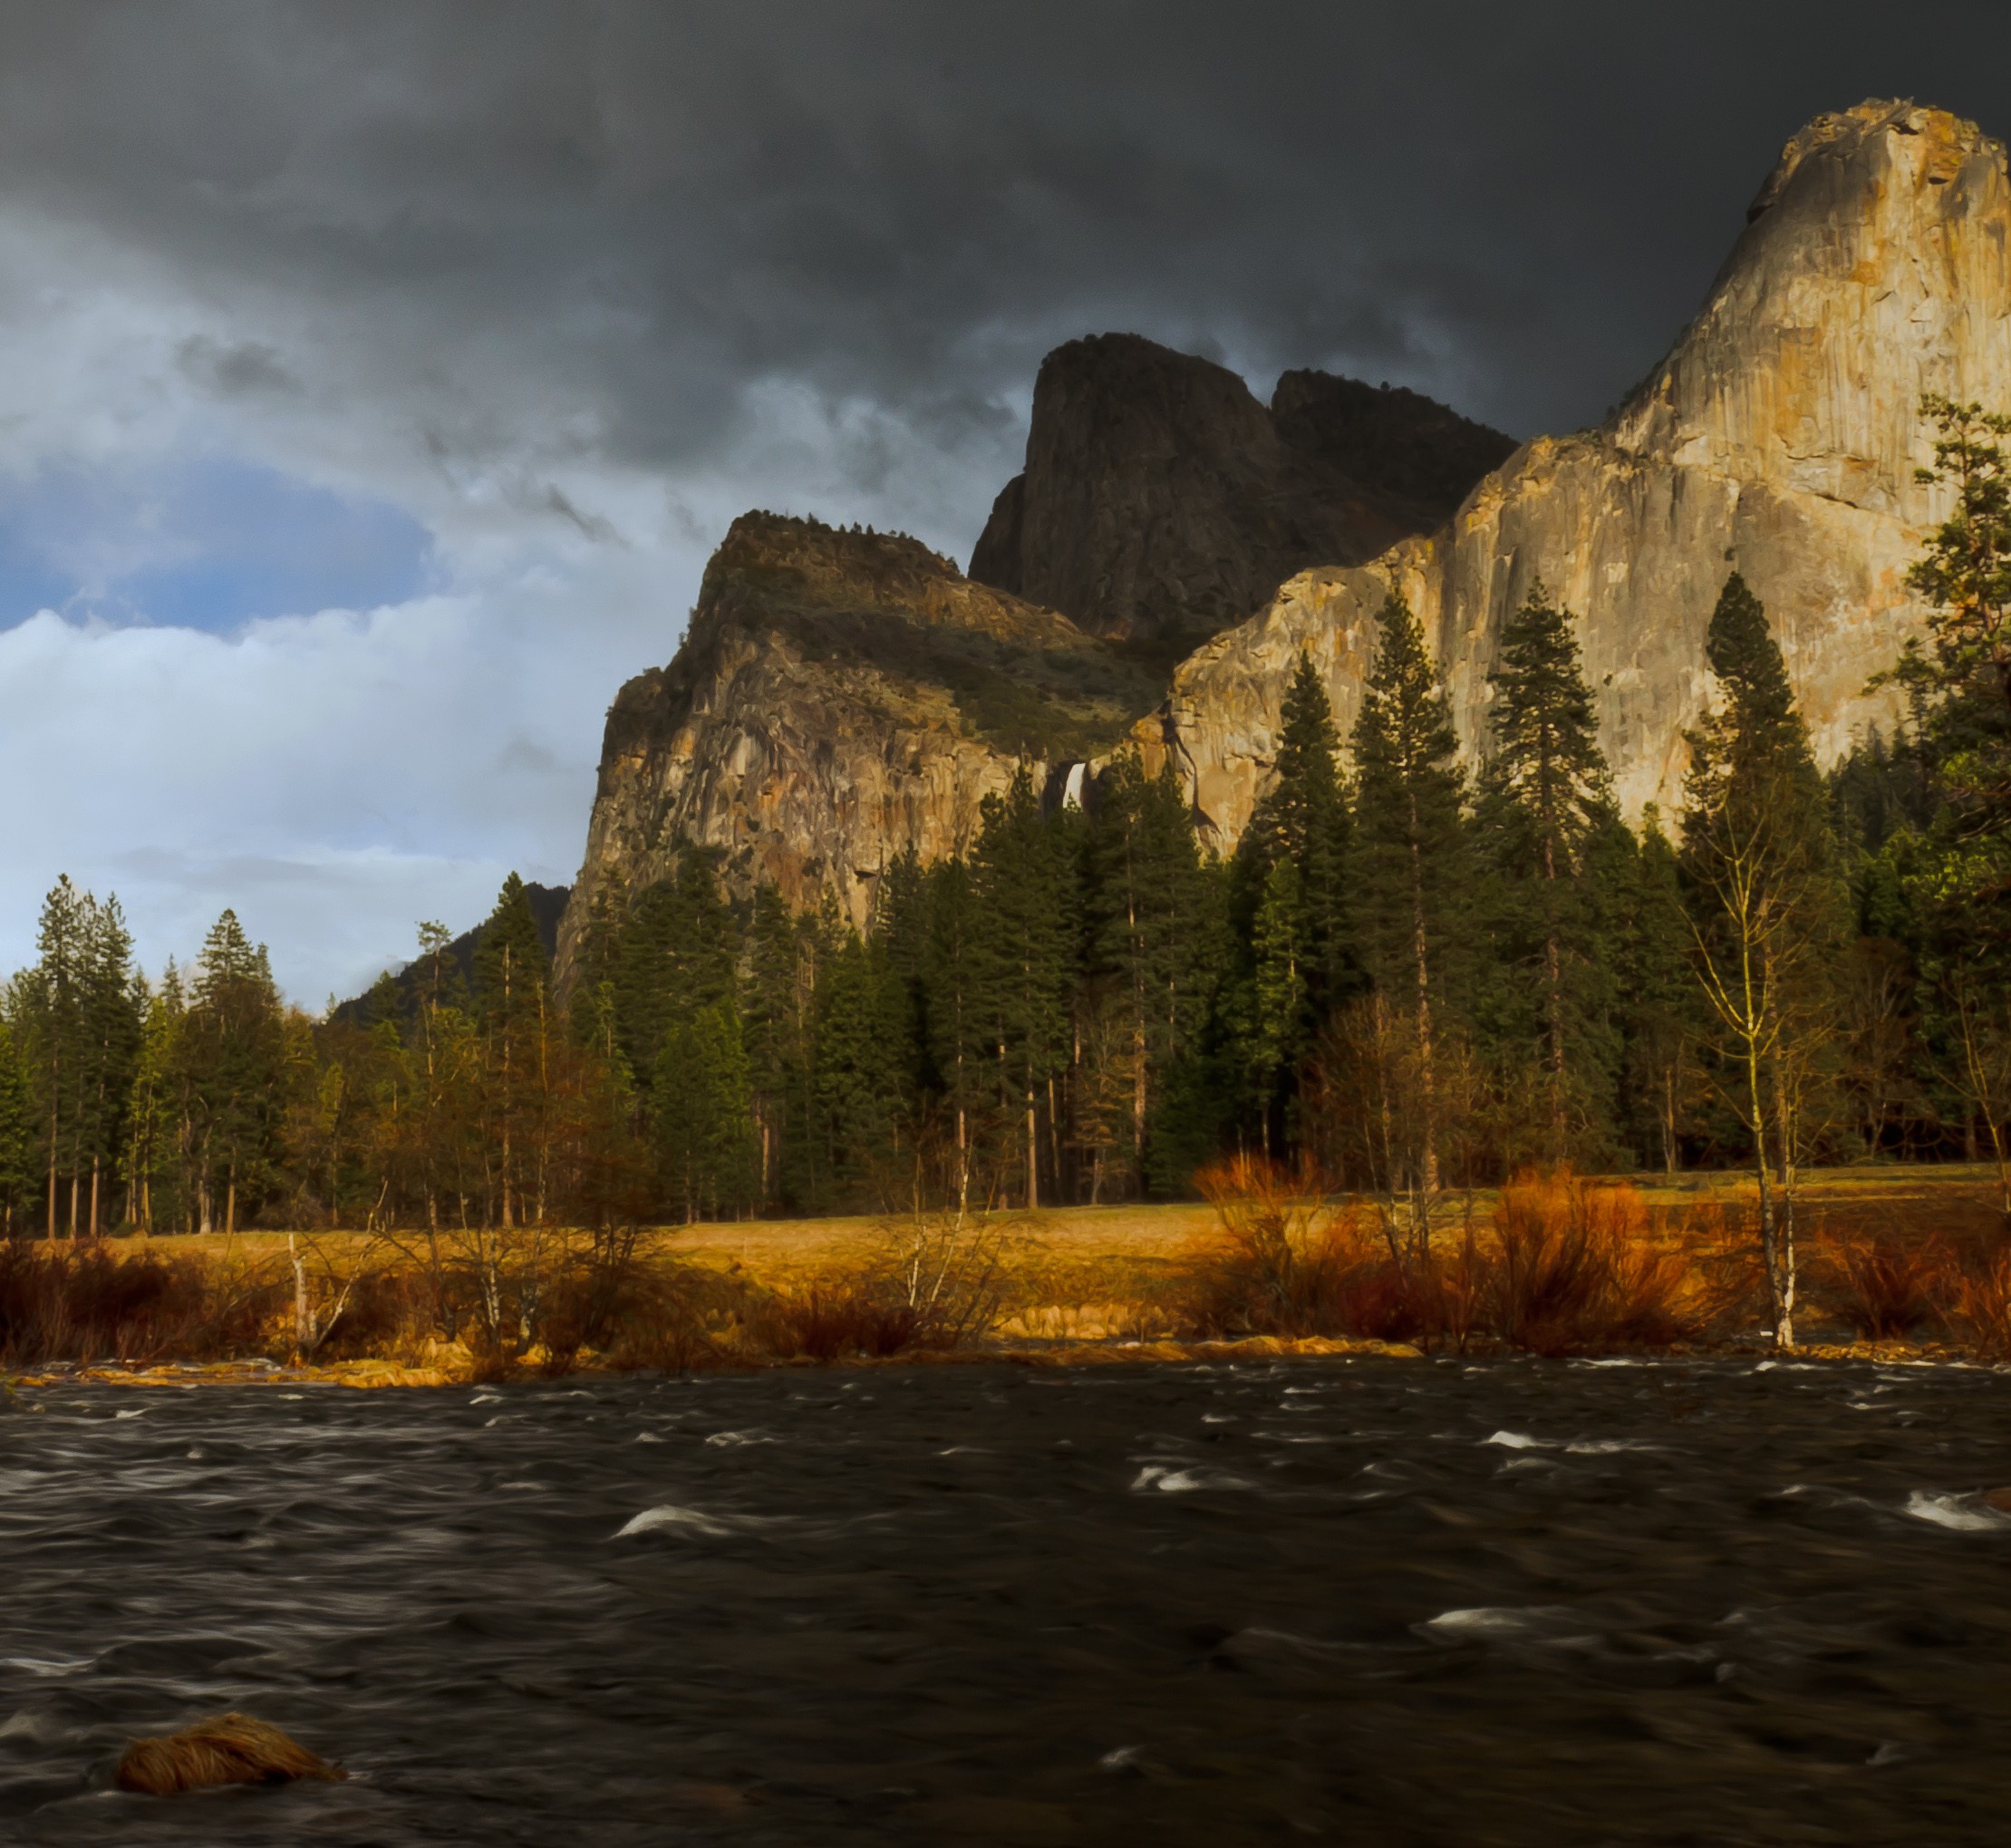 Gates of Yosemite before a storm